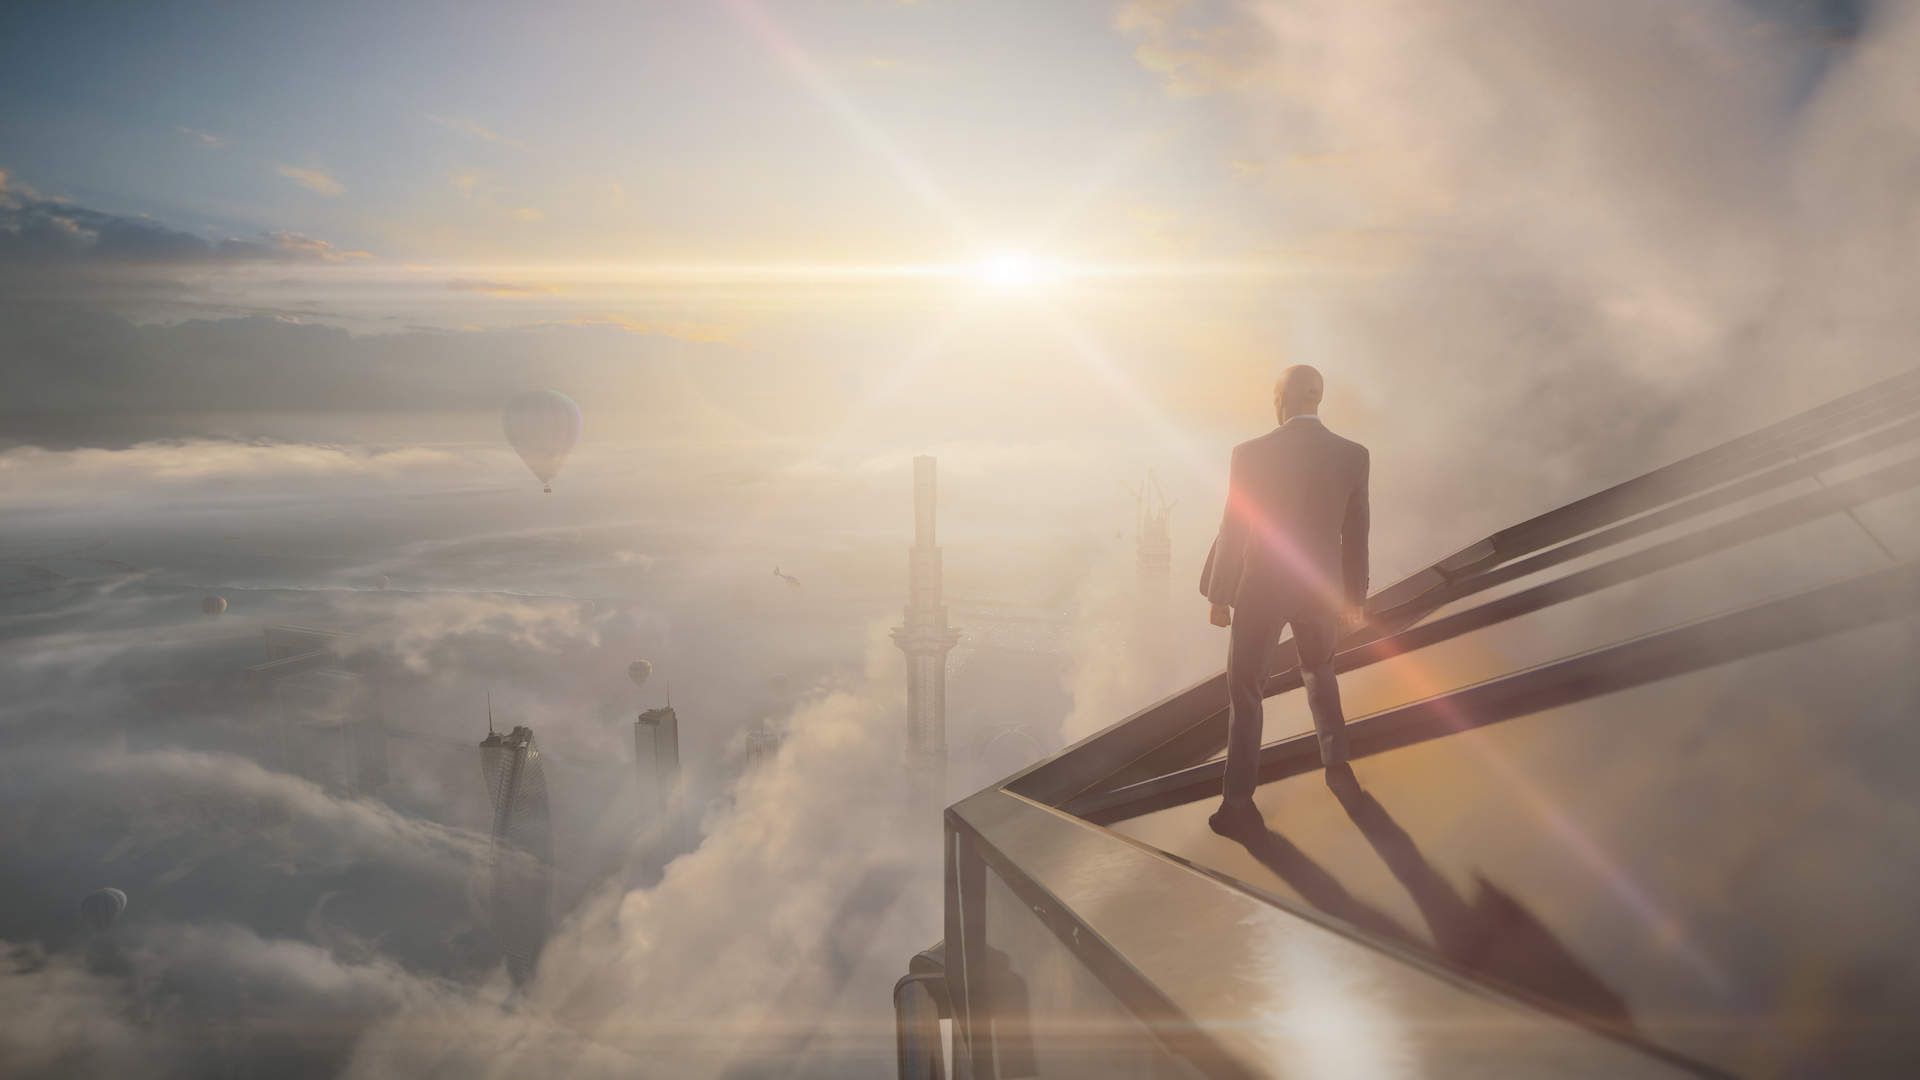 Hitman 3 Will Let Players Carry Forward Locations and Progress From Previous Games